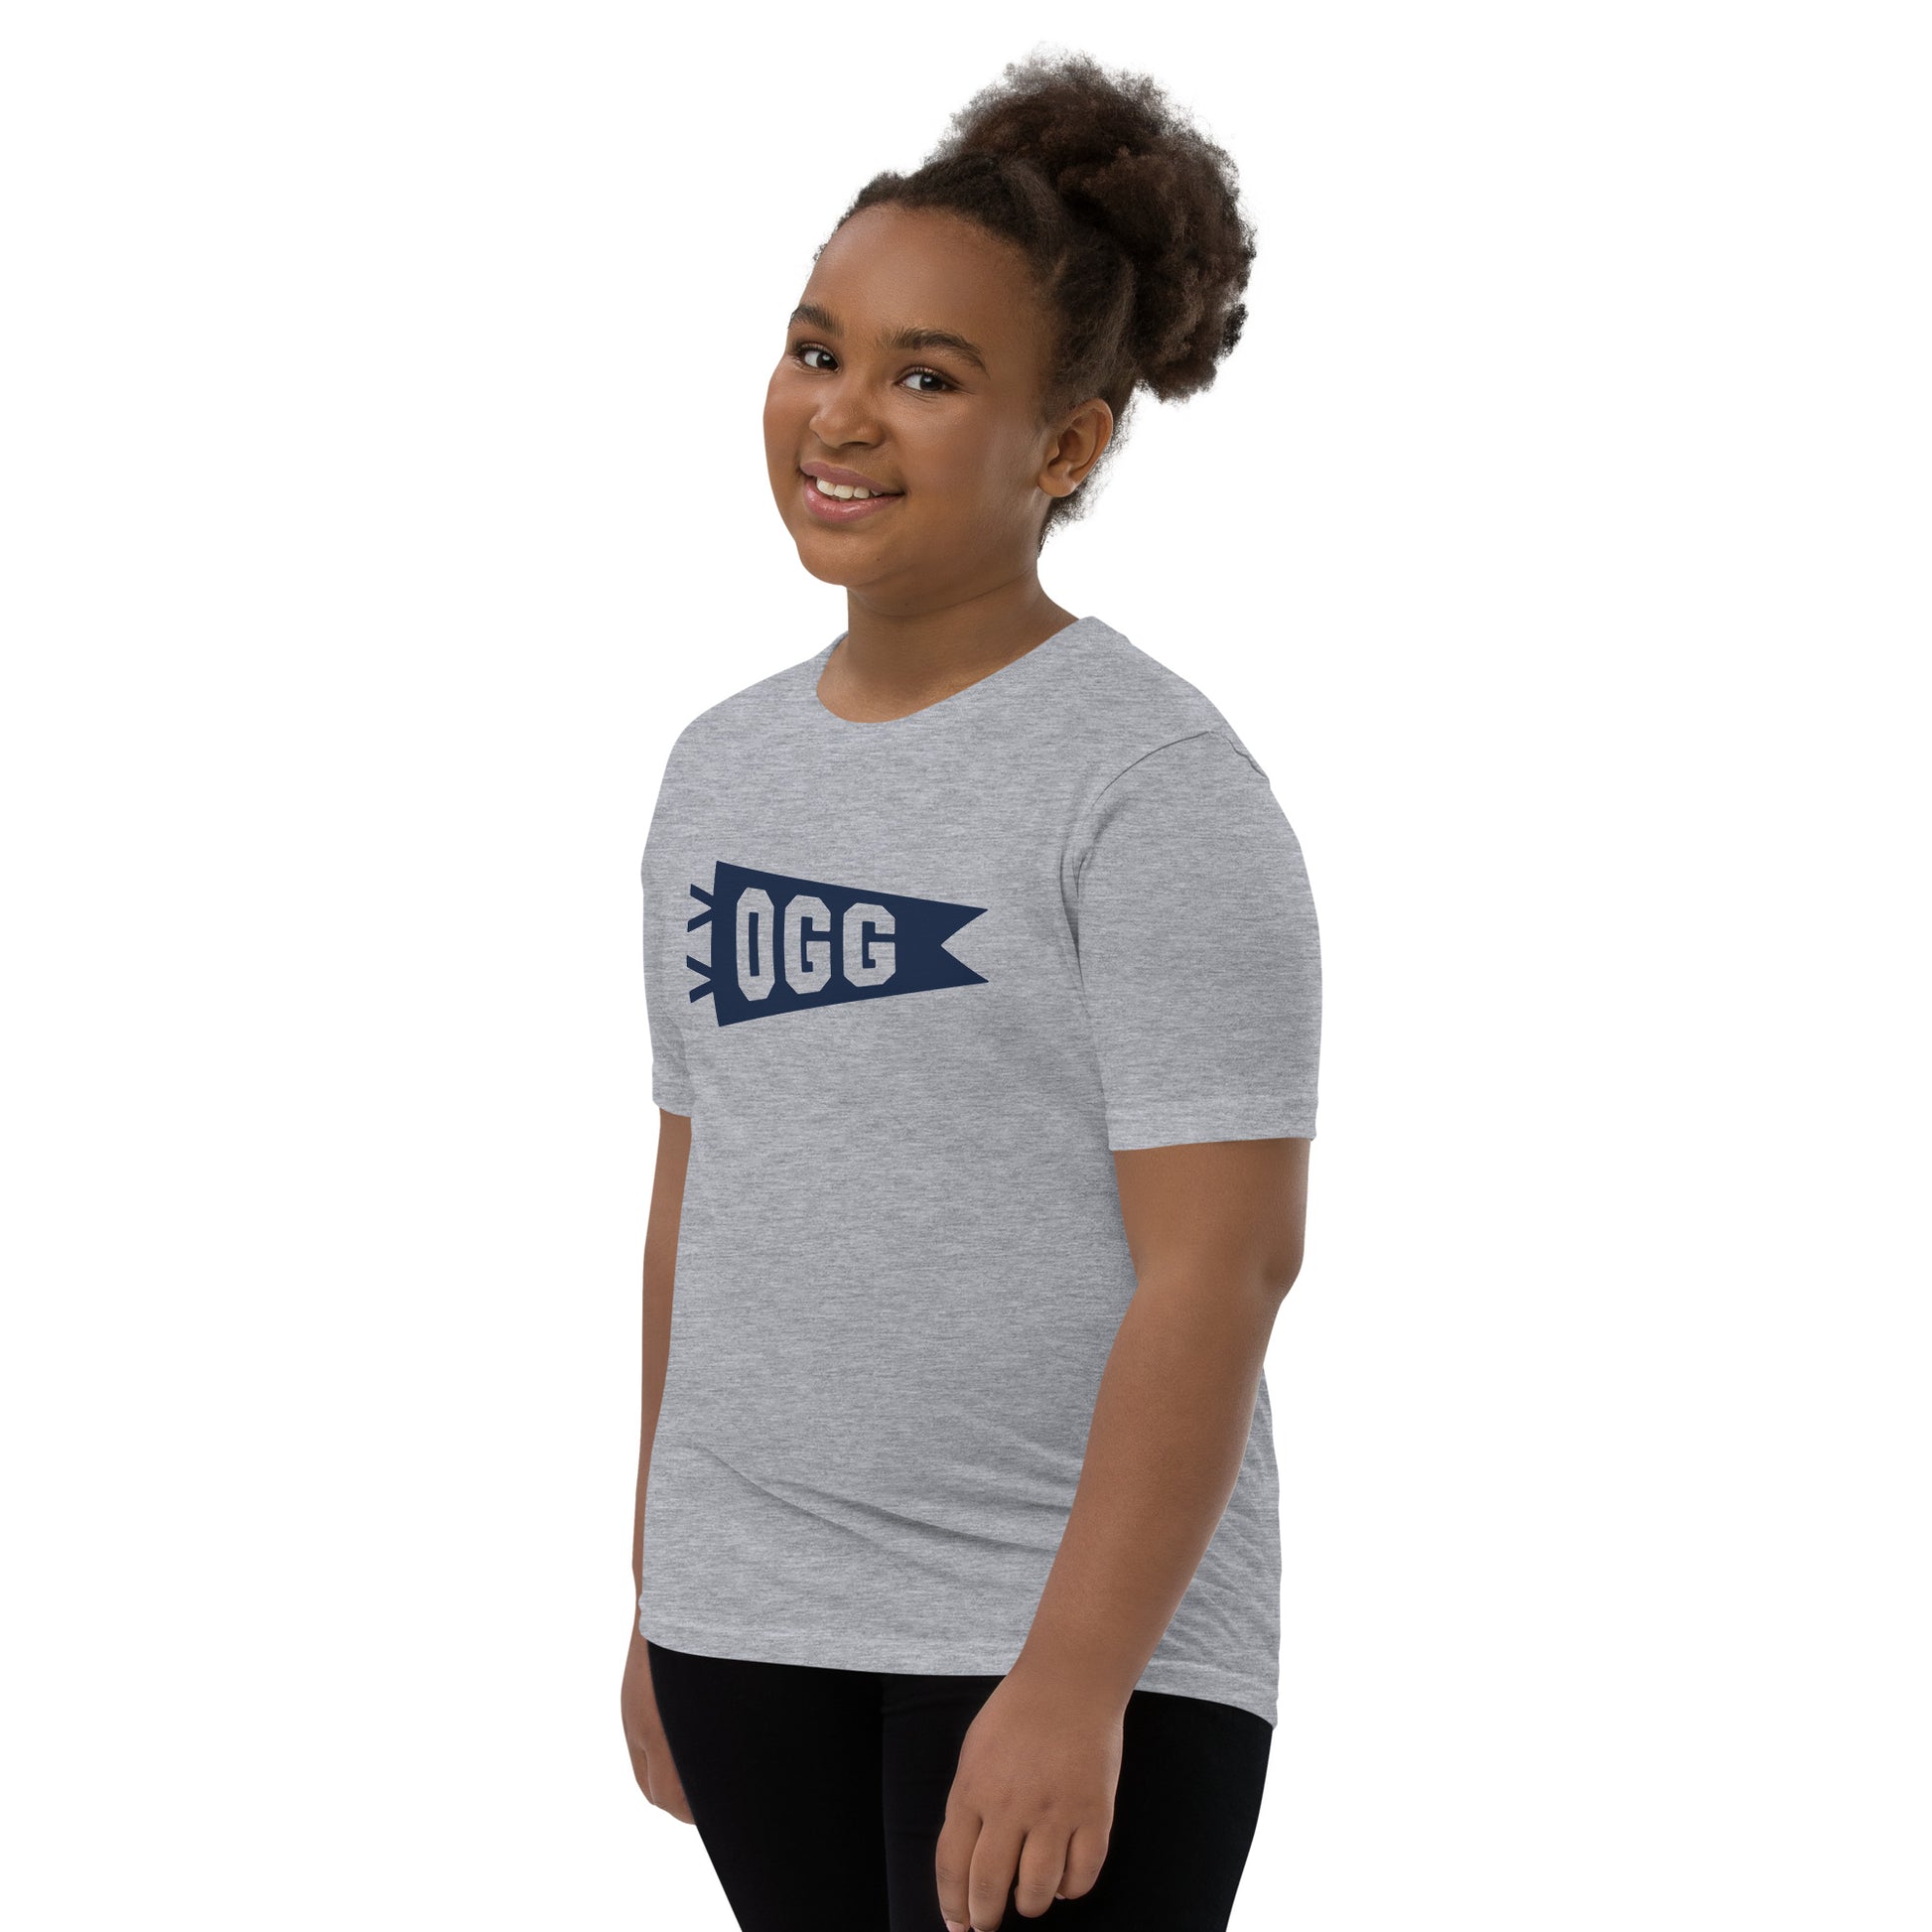 Kid's Airport Code Tee - Navy Blue Graphic • OGG Maui • YHM Designs - Image 04